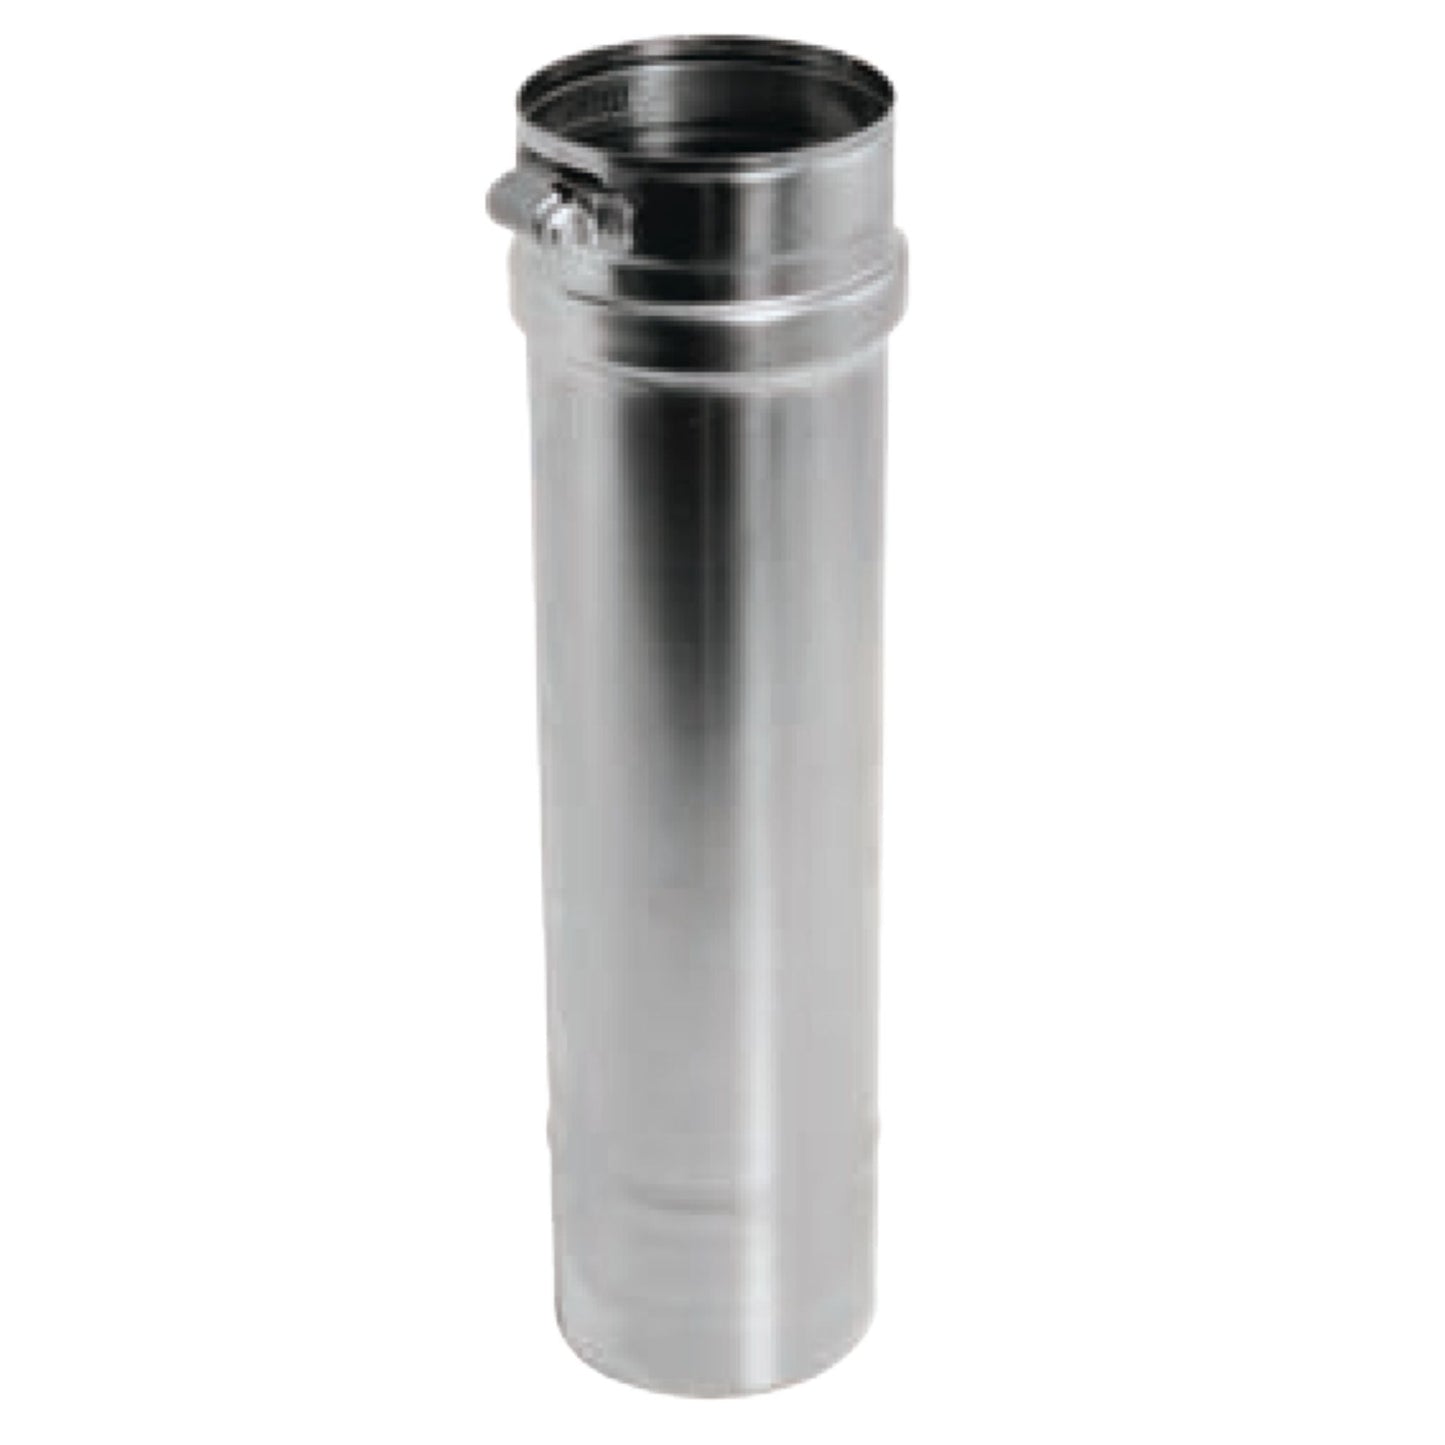 DuraVent FasNSeal 9" x 48" 316L Stainless Steel Vent Length